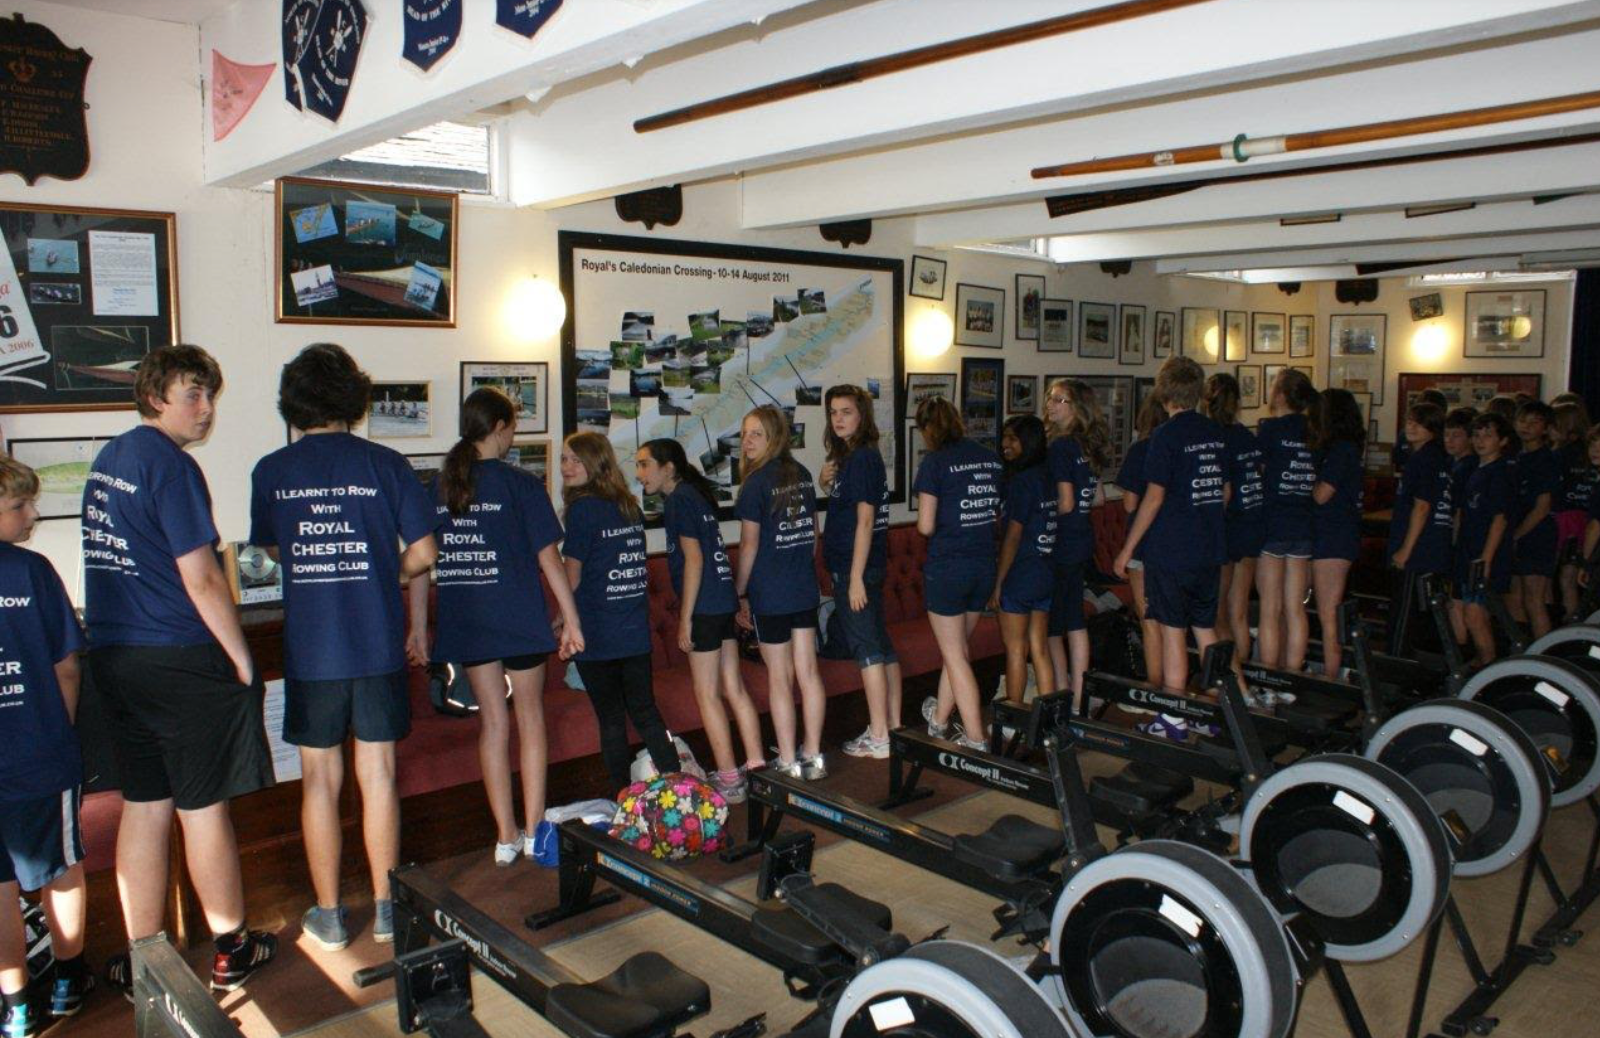 Royal Chester rowing juniors